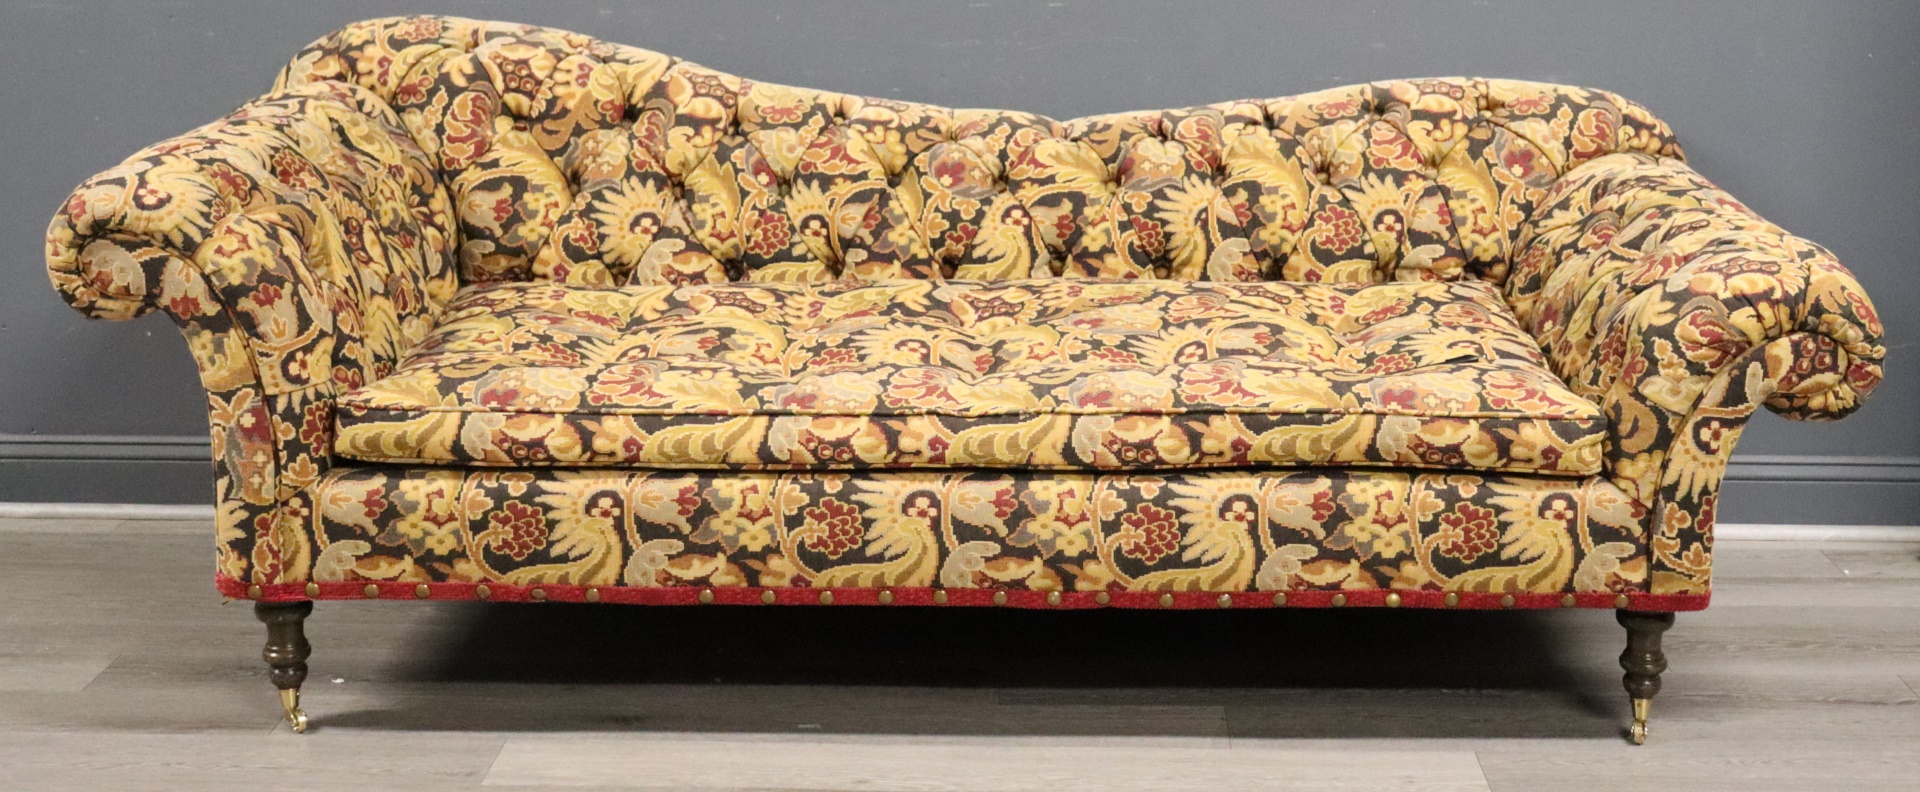 GEORGE SMITH STYLE UPHOLSTERED,